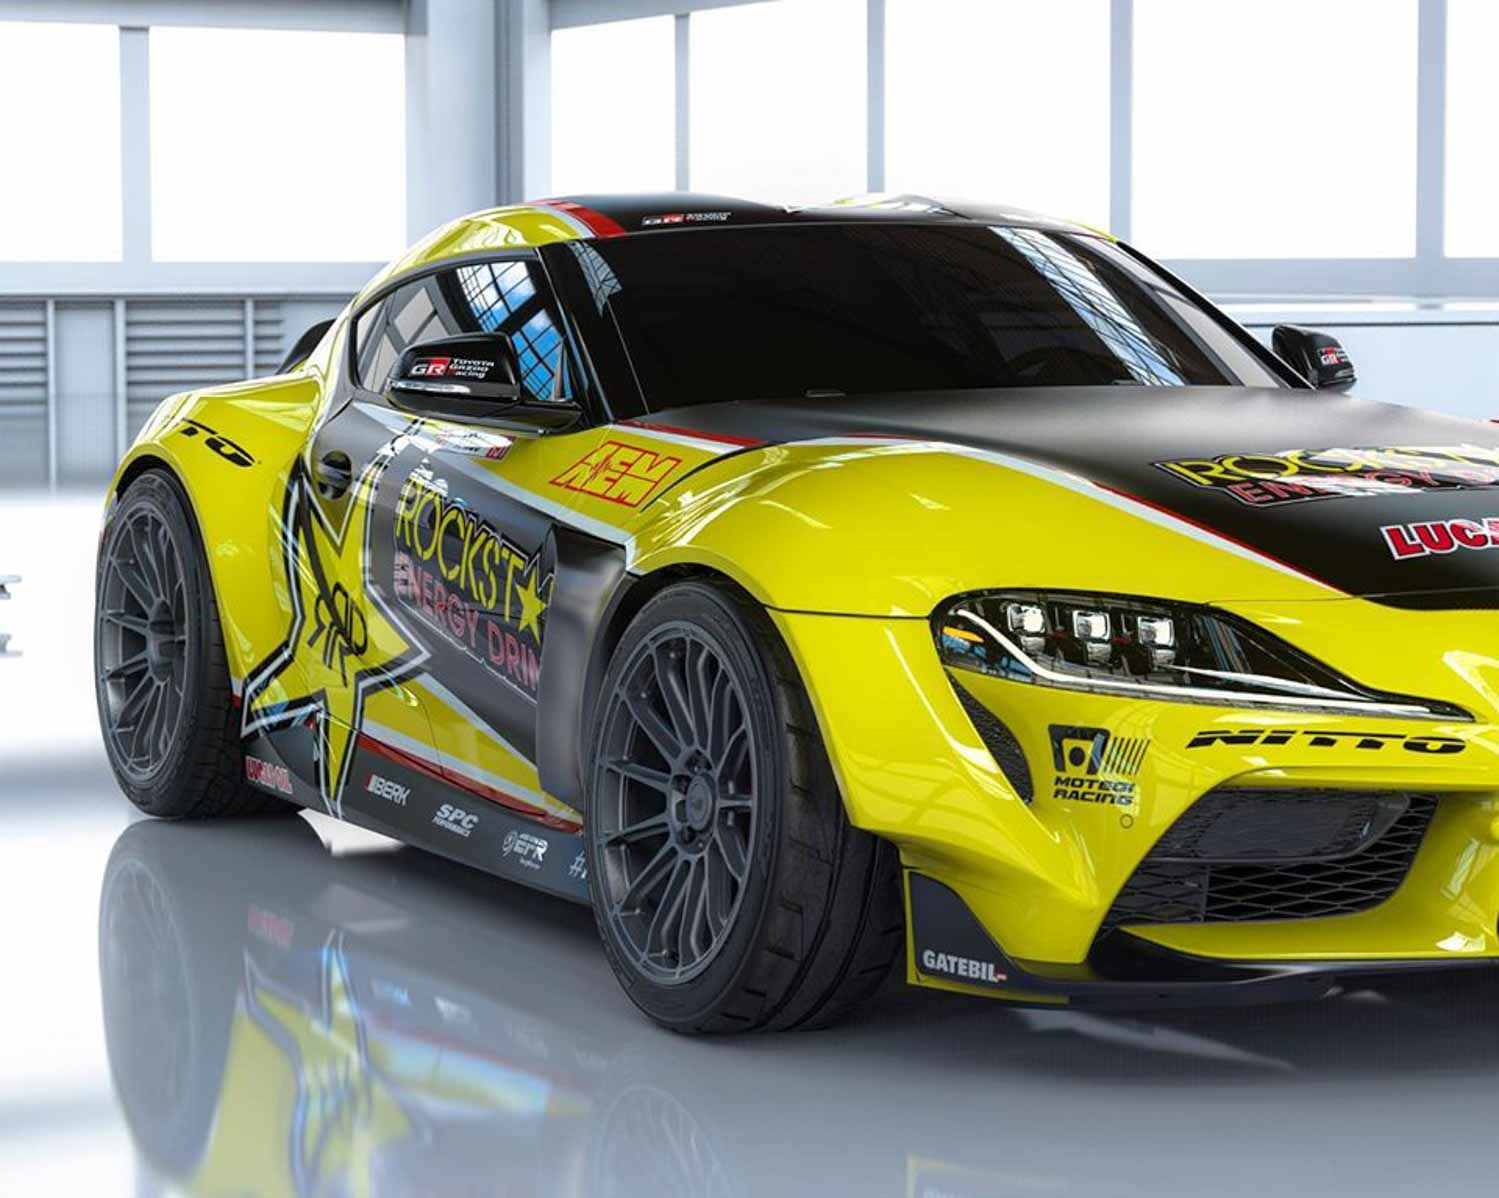 This 1000+ Hp Toyota Supra Drift Car Will Make You Drool For More